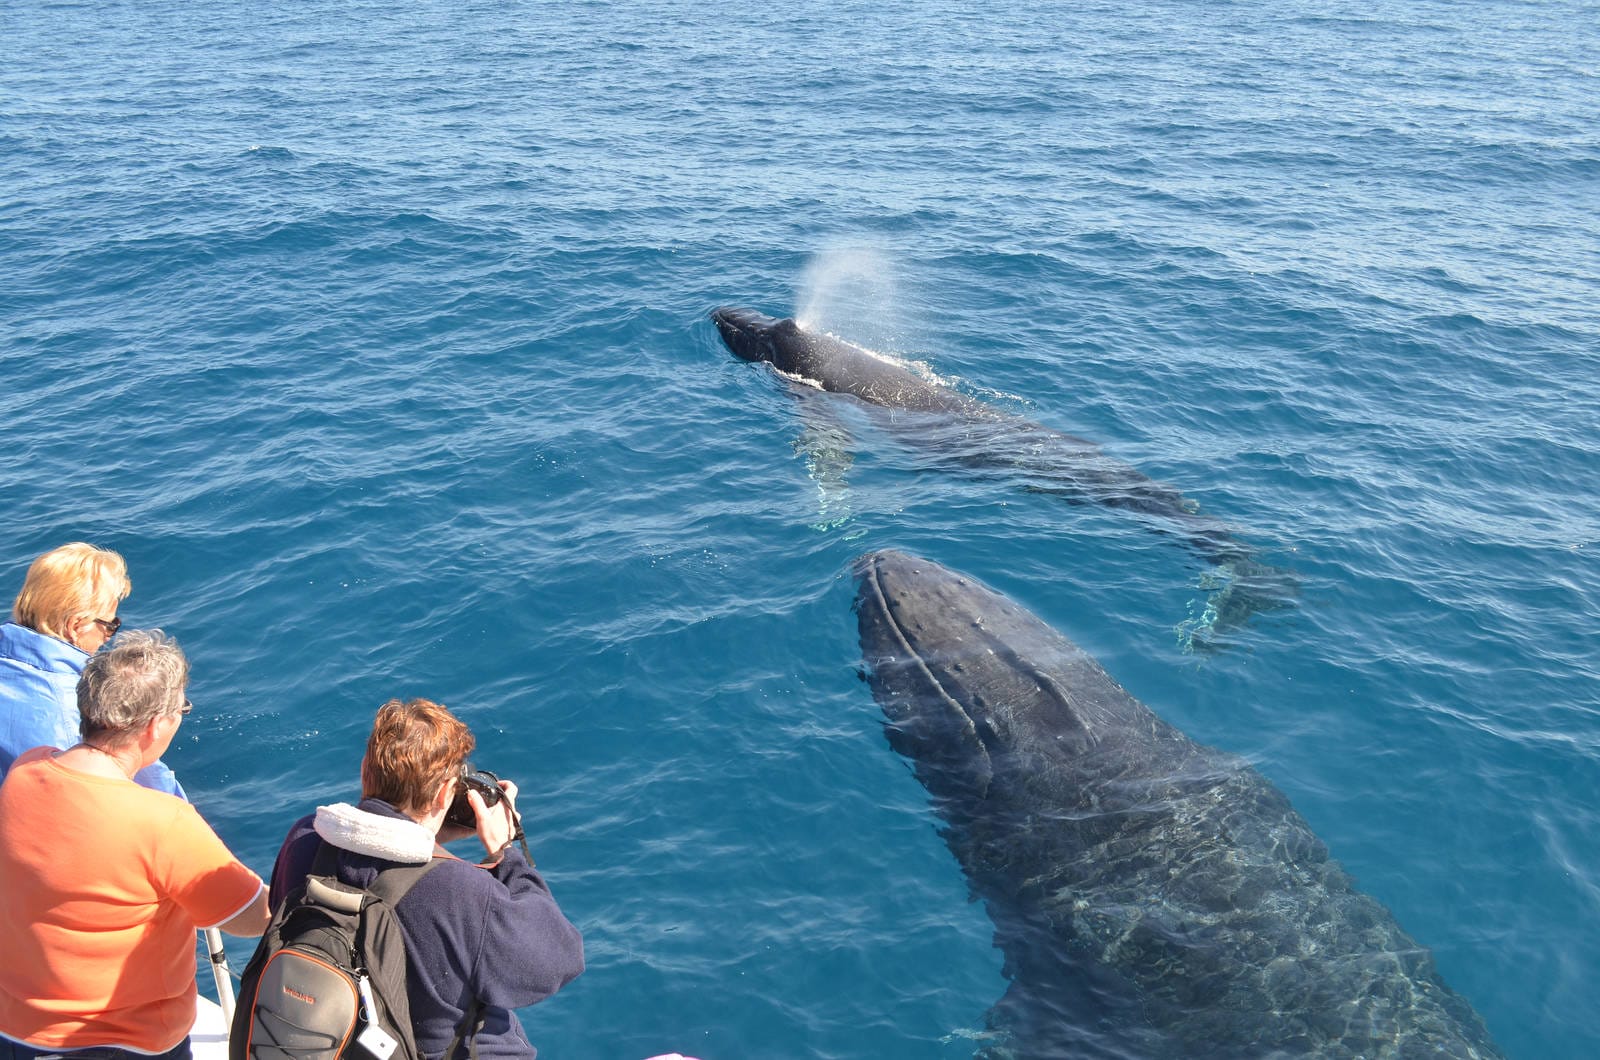 5 of the Most Stunning Wild Dolphin and Whale Encounters Captured on Film